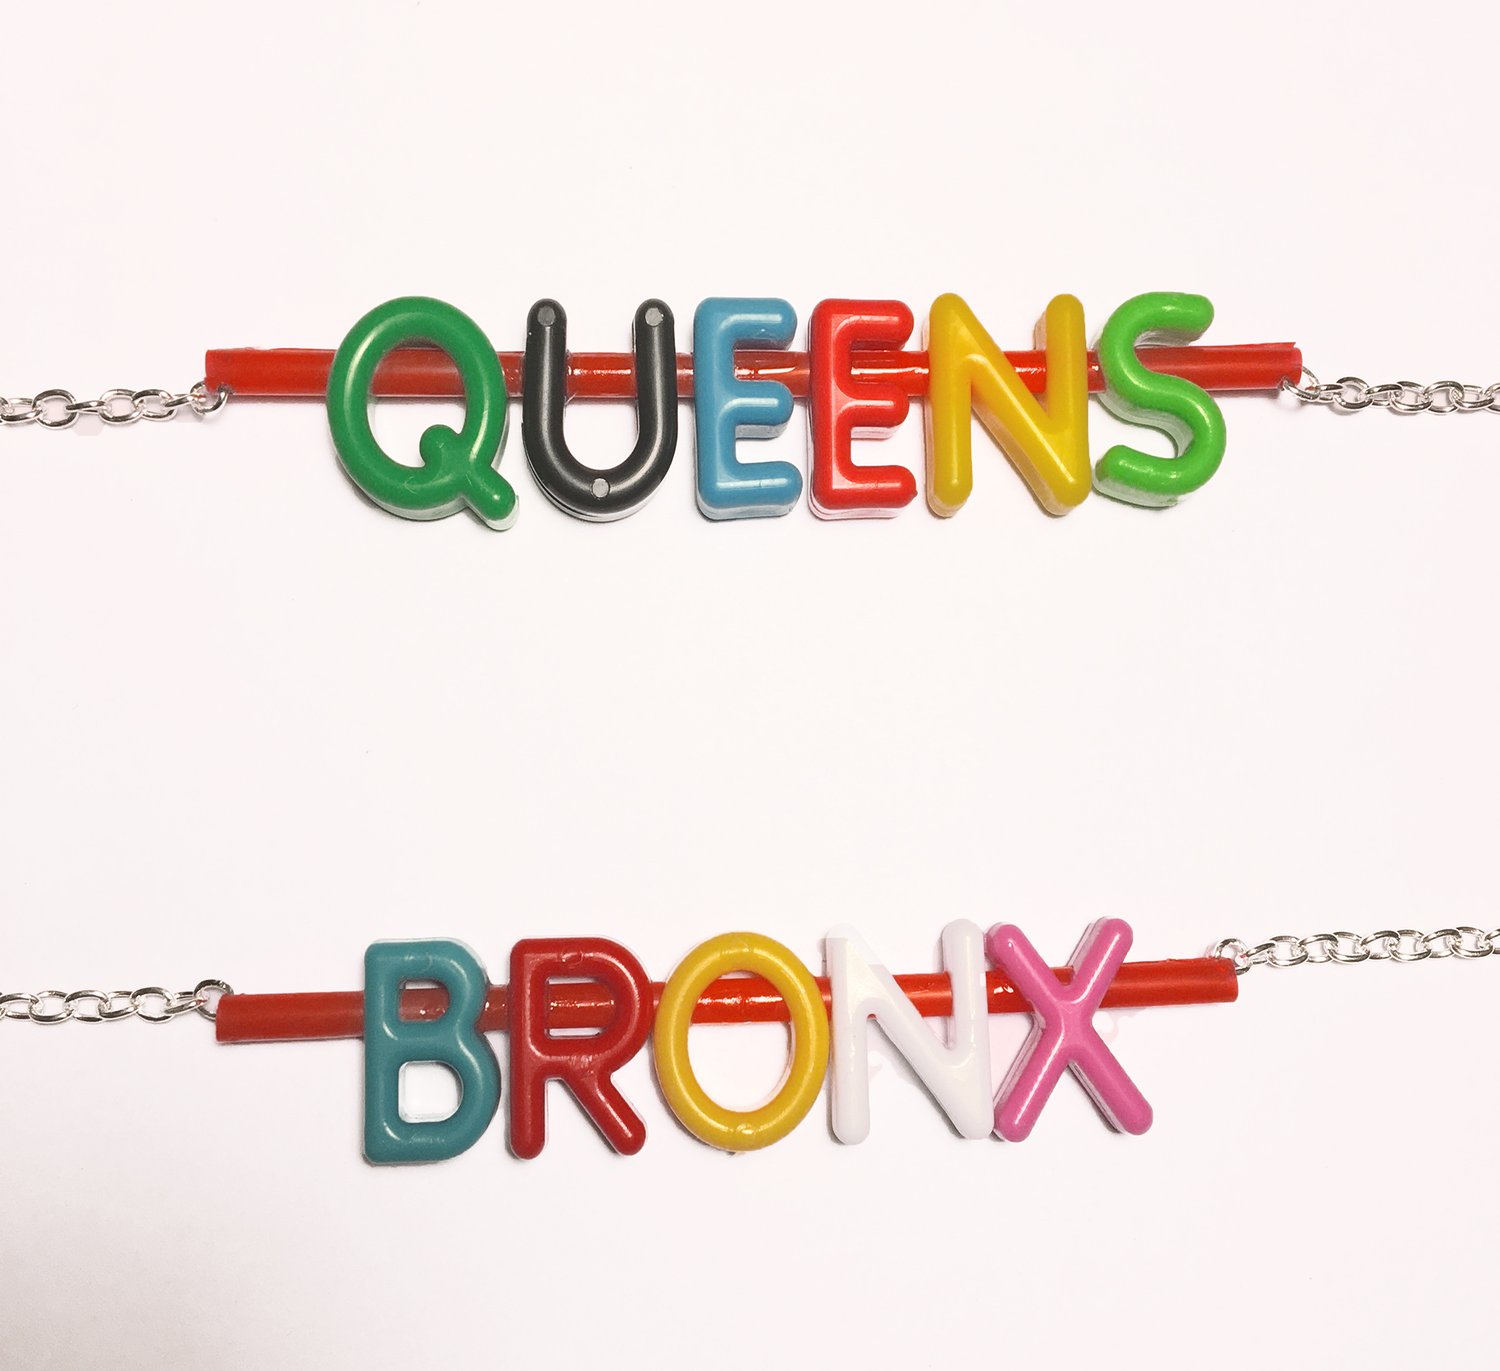 Image of NYC CHAIN